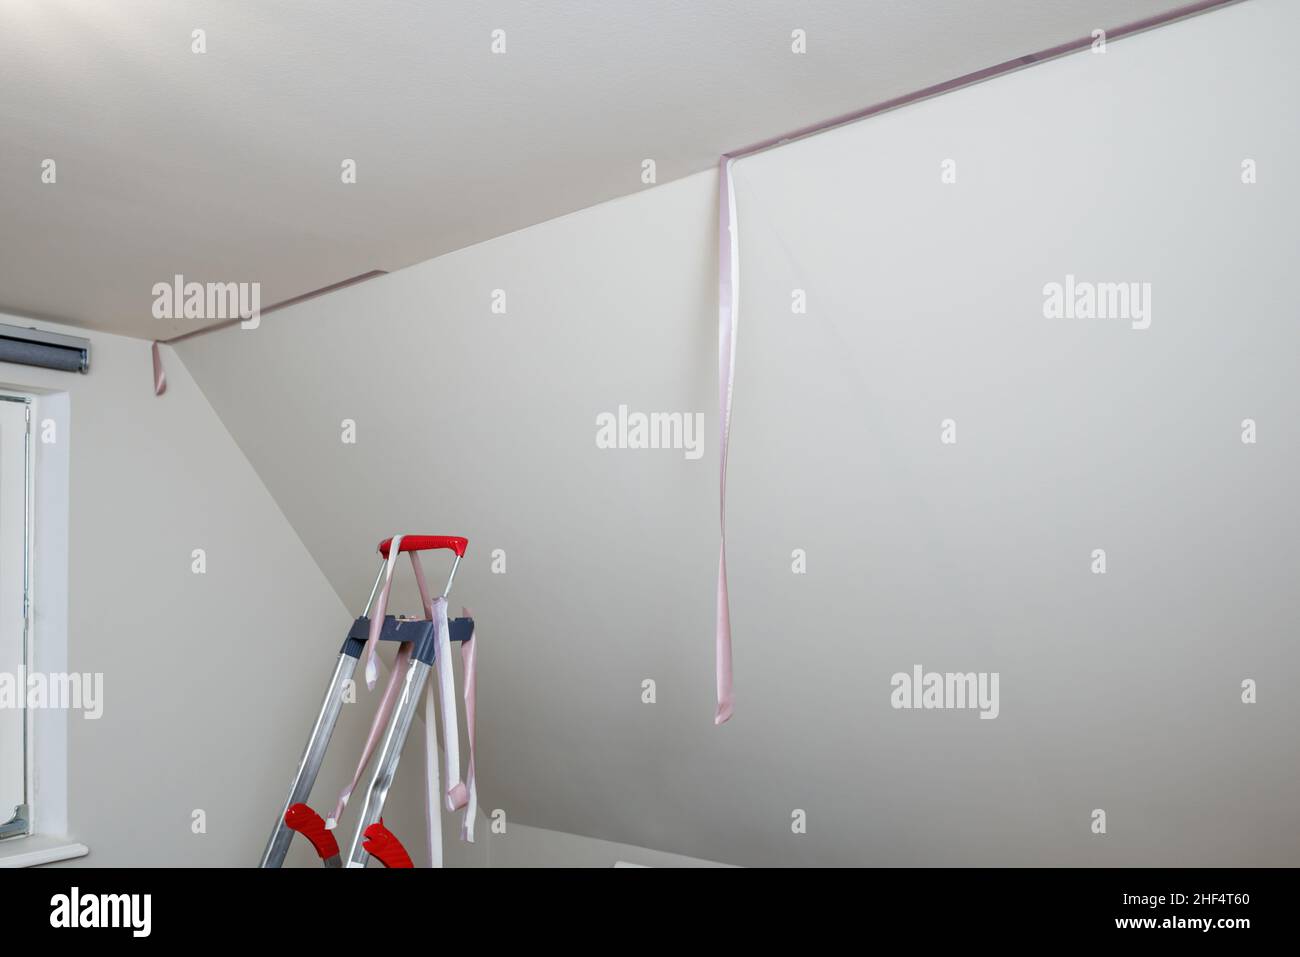 Removal of purple scotch tape from the ceiling after painting the walls with the help of a ladder Stock Photo